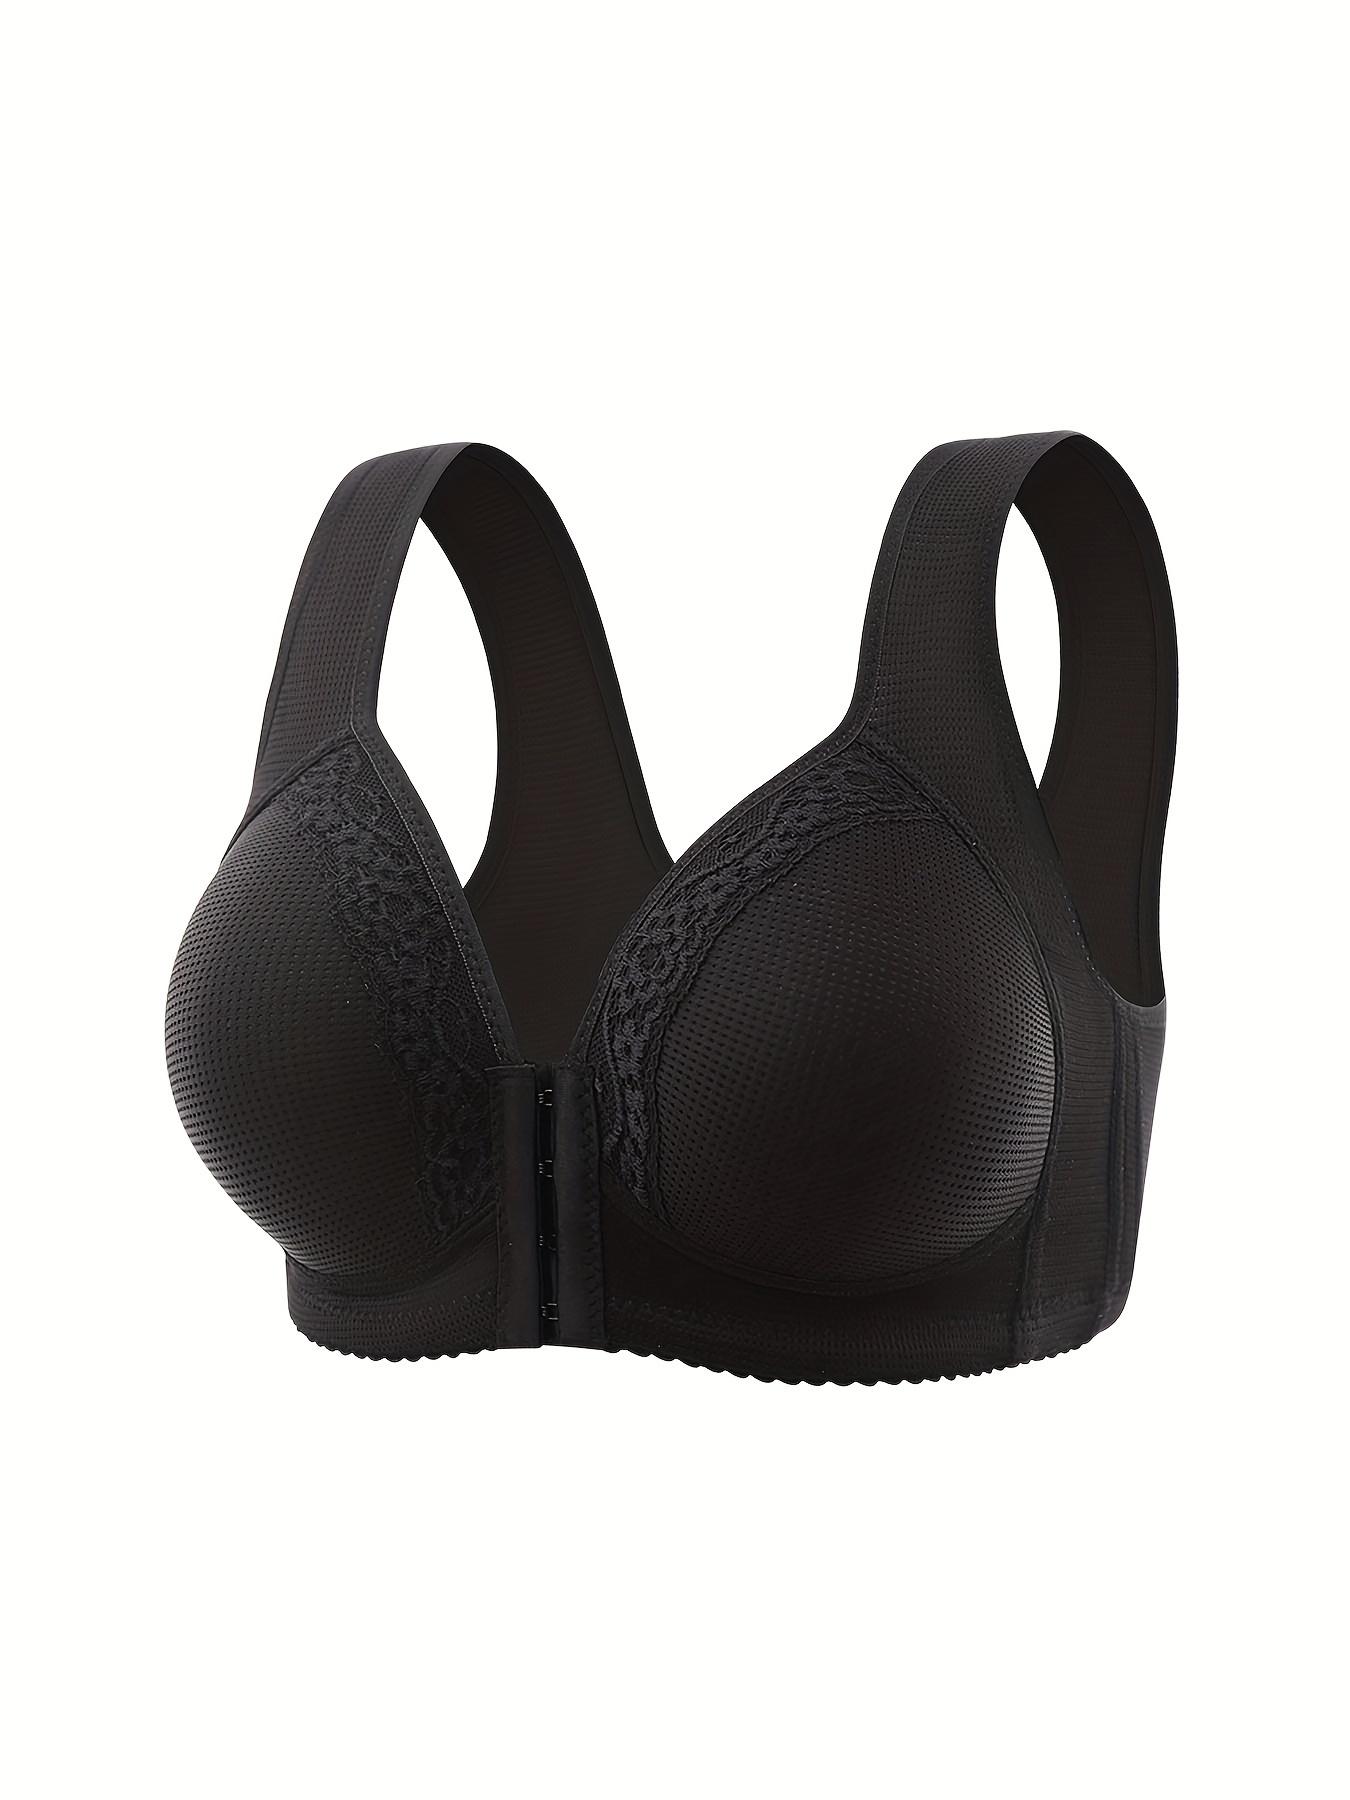 BDAILKA Front Clasp Bras for Women, Wireless Full Coverage Bras